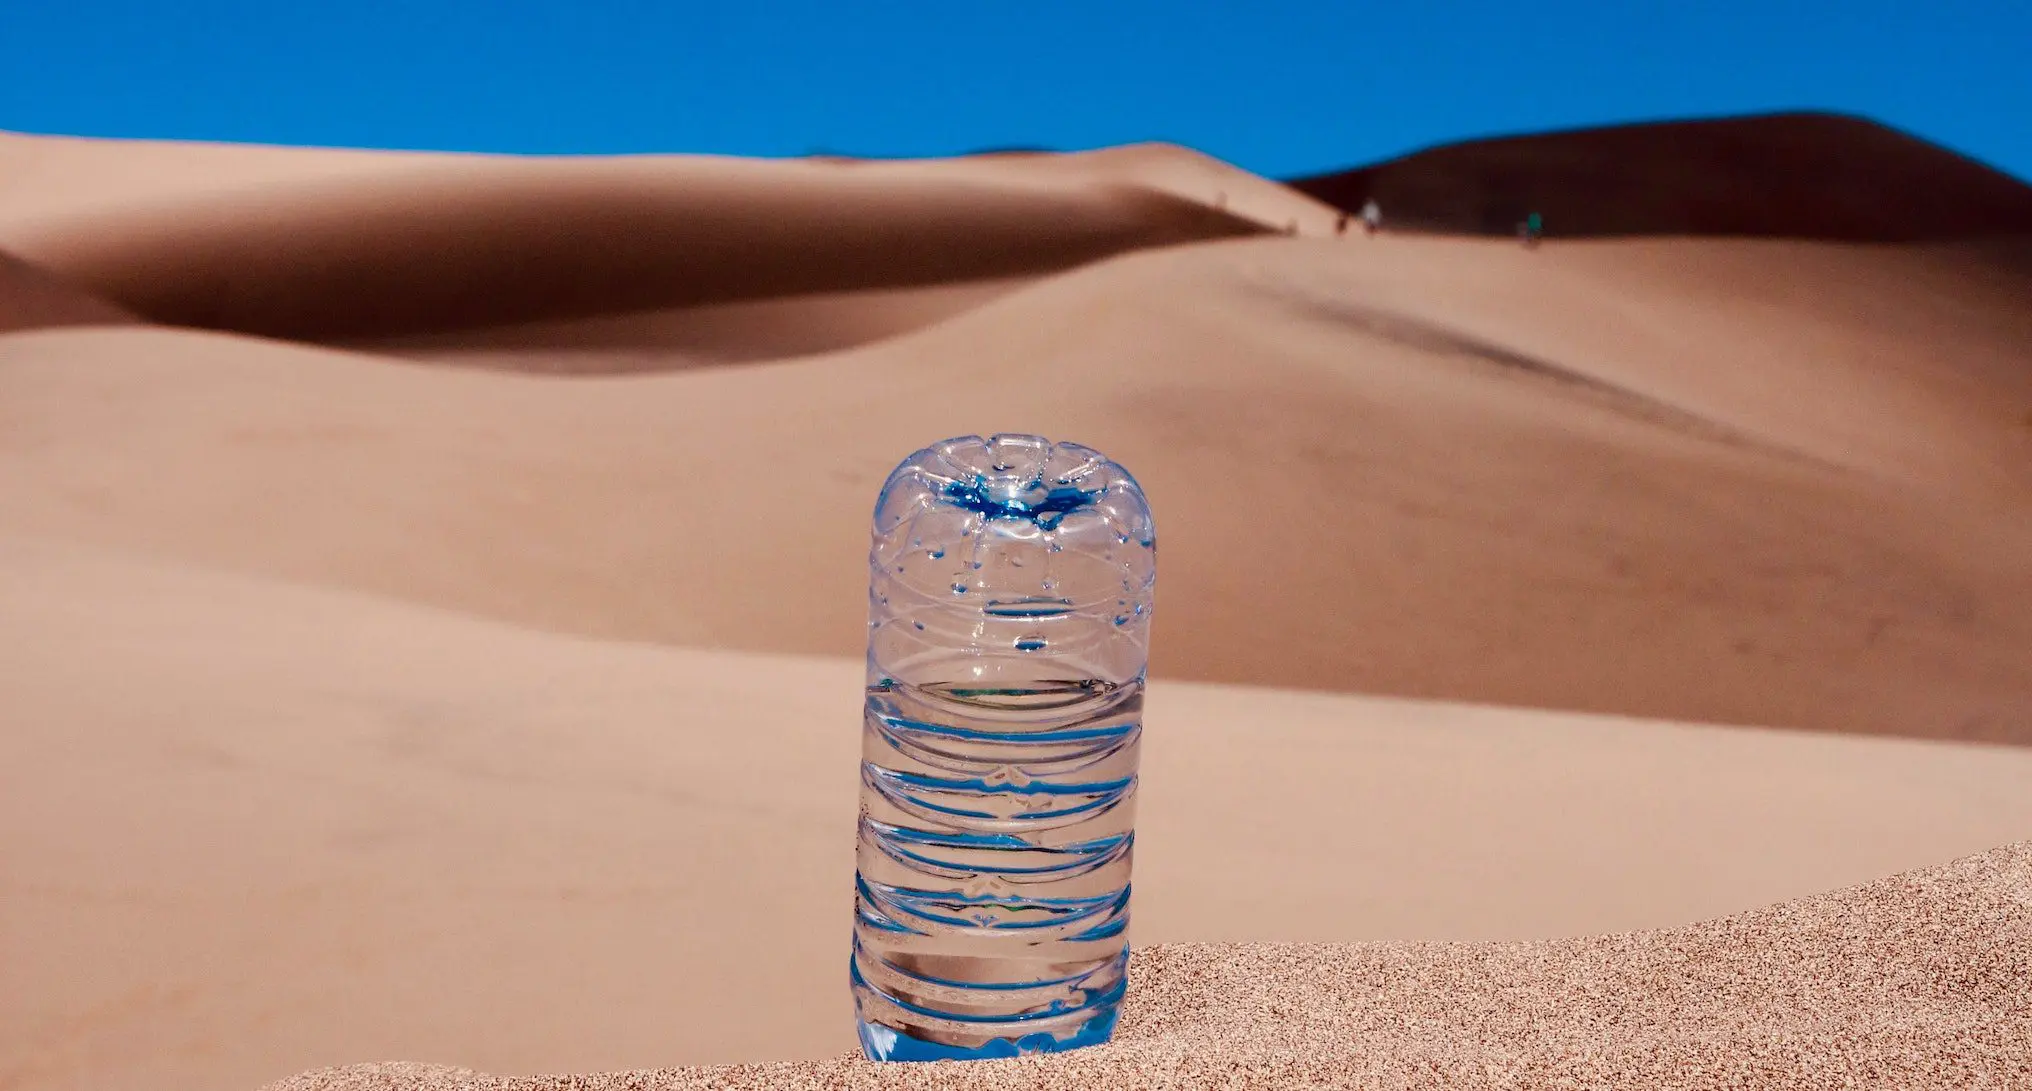 https://www.officeh2o.com/wp-content/uploads/2021/08/why-you-should-never-drink-water-from-a-warm-plastic-bottle.webp